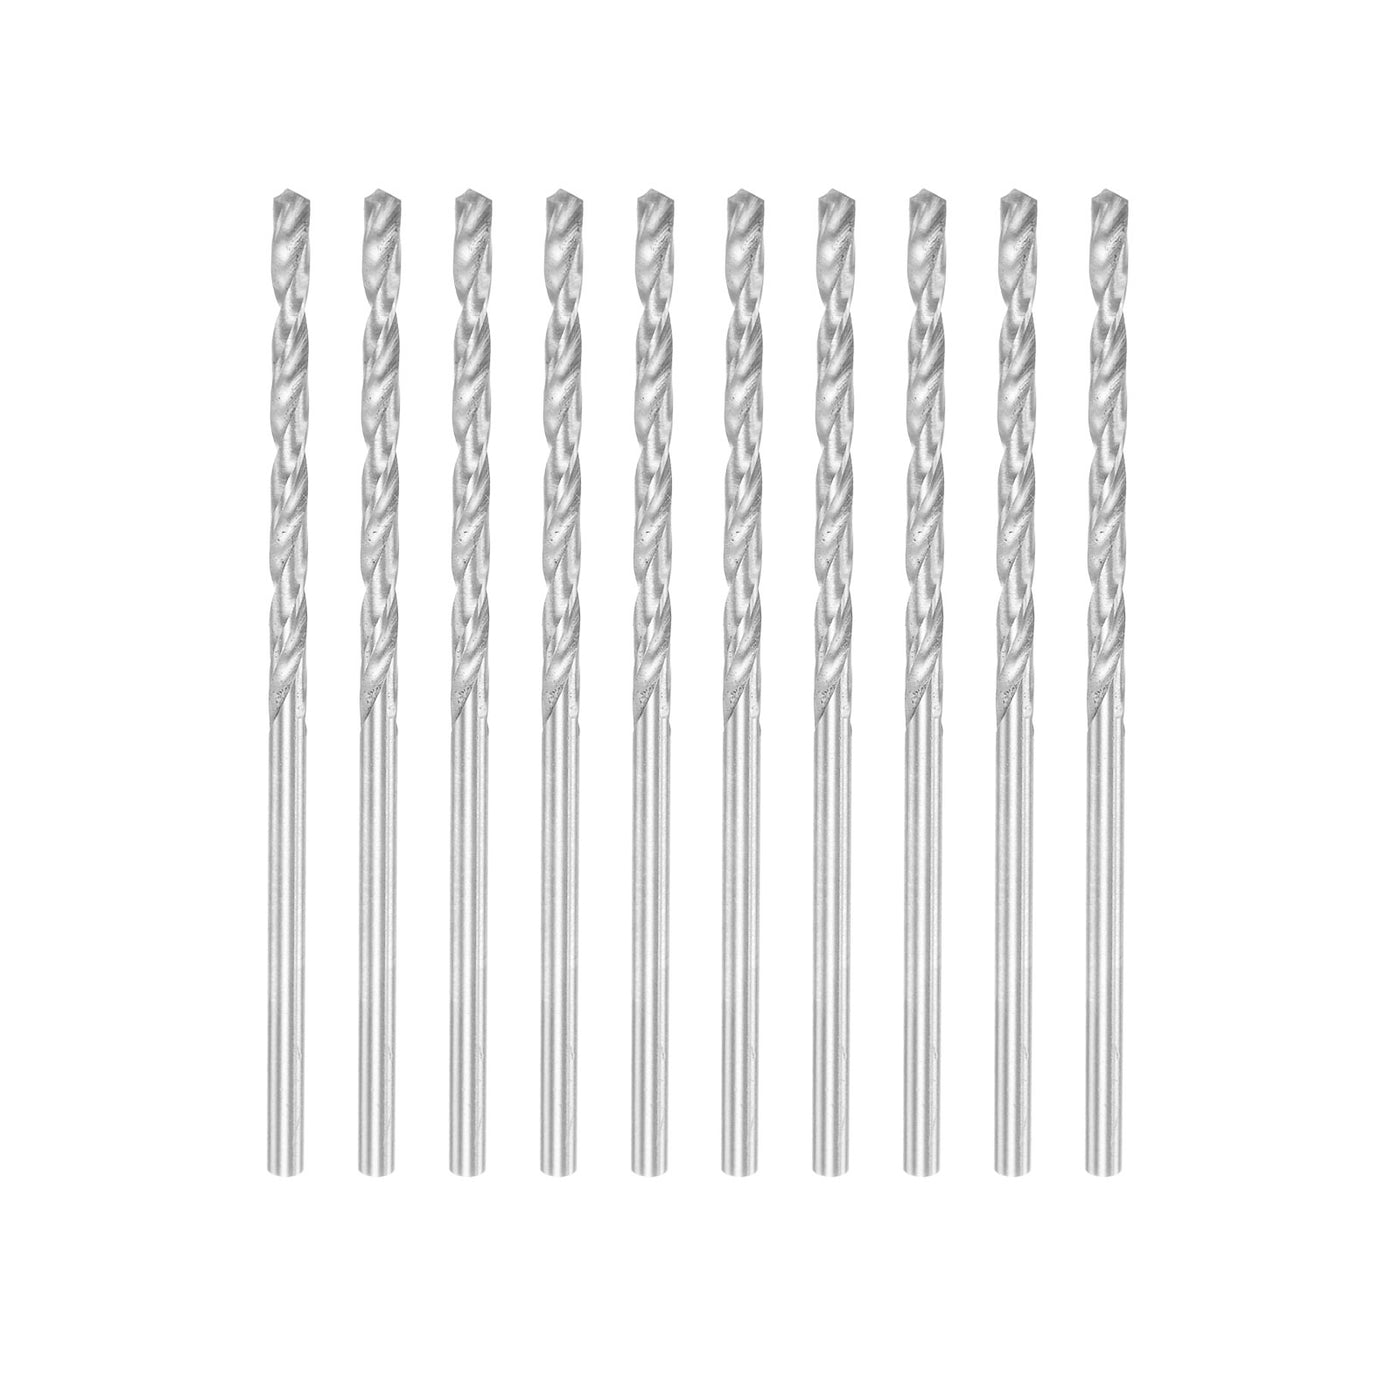 uxcell Uxcell 10 Pcs 2.15mm High Speed Steel Drill Bits, Fully Ground 57mm Length Drill Bit